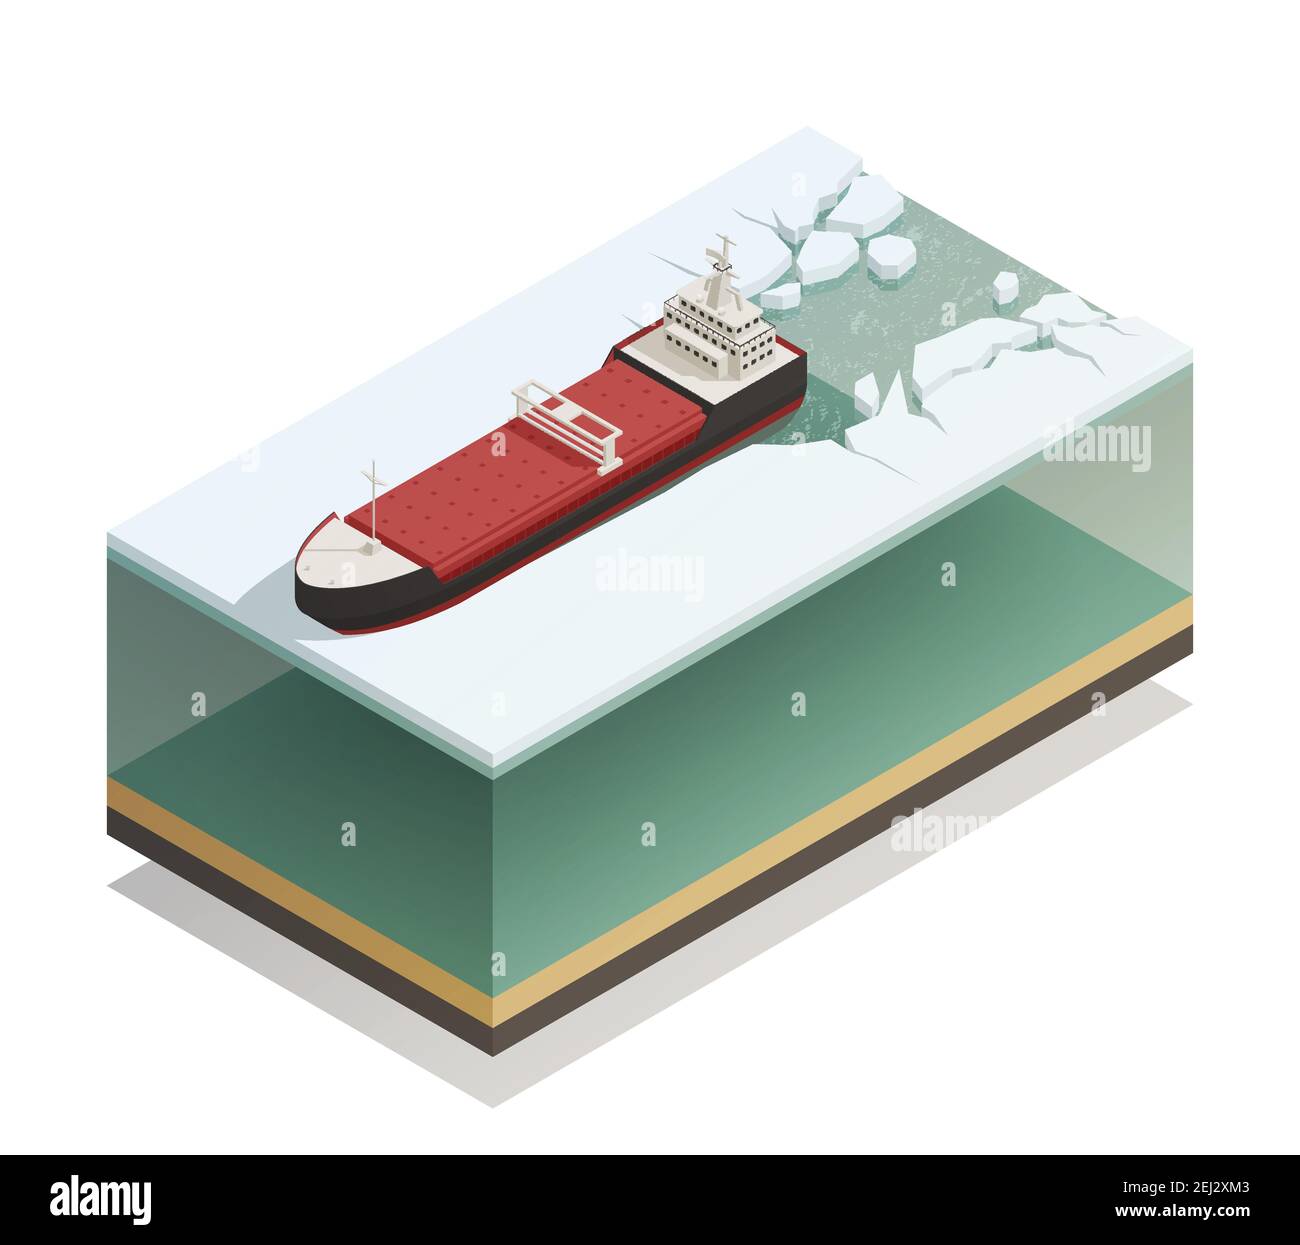 Icebreaker ship afloat breaking ice with thick water layer beneath vessel isometric model composition vector illustration Stock Vector